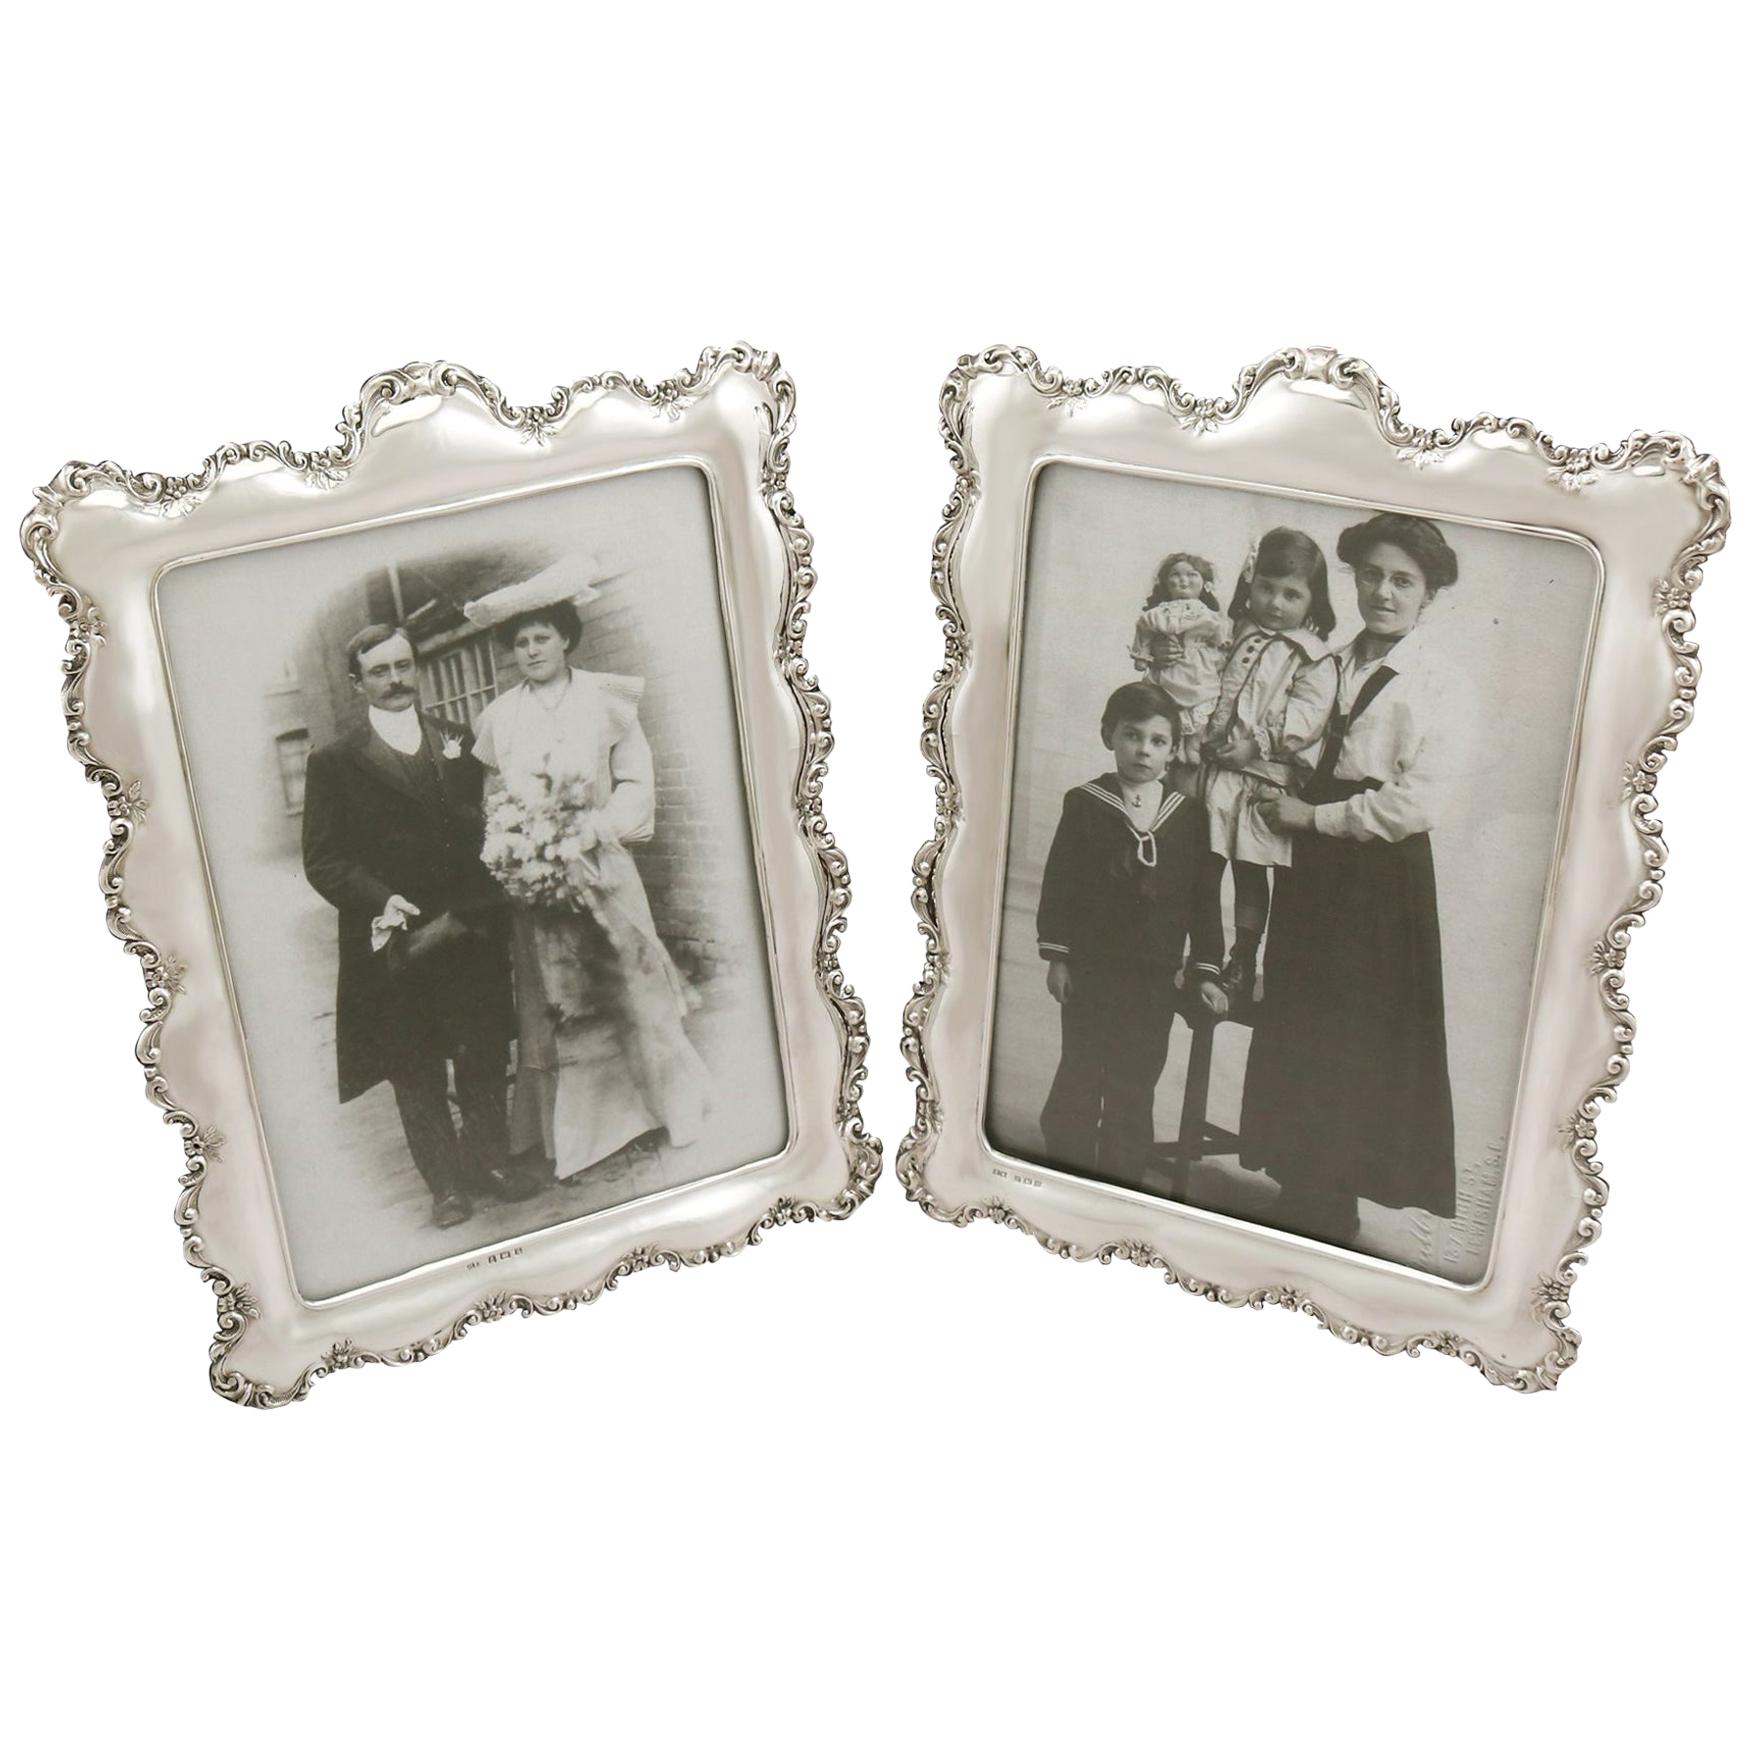 Antique Edwardian Sterling Silver Photograph Frames by Henry Matthews